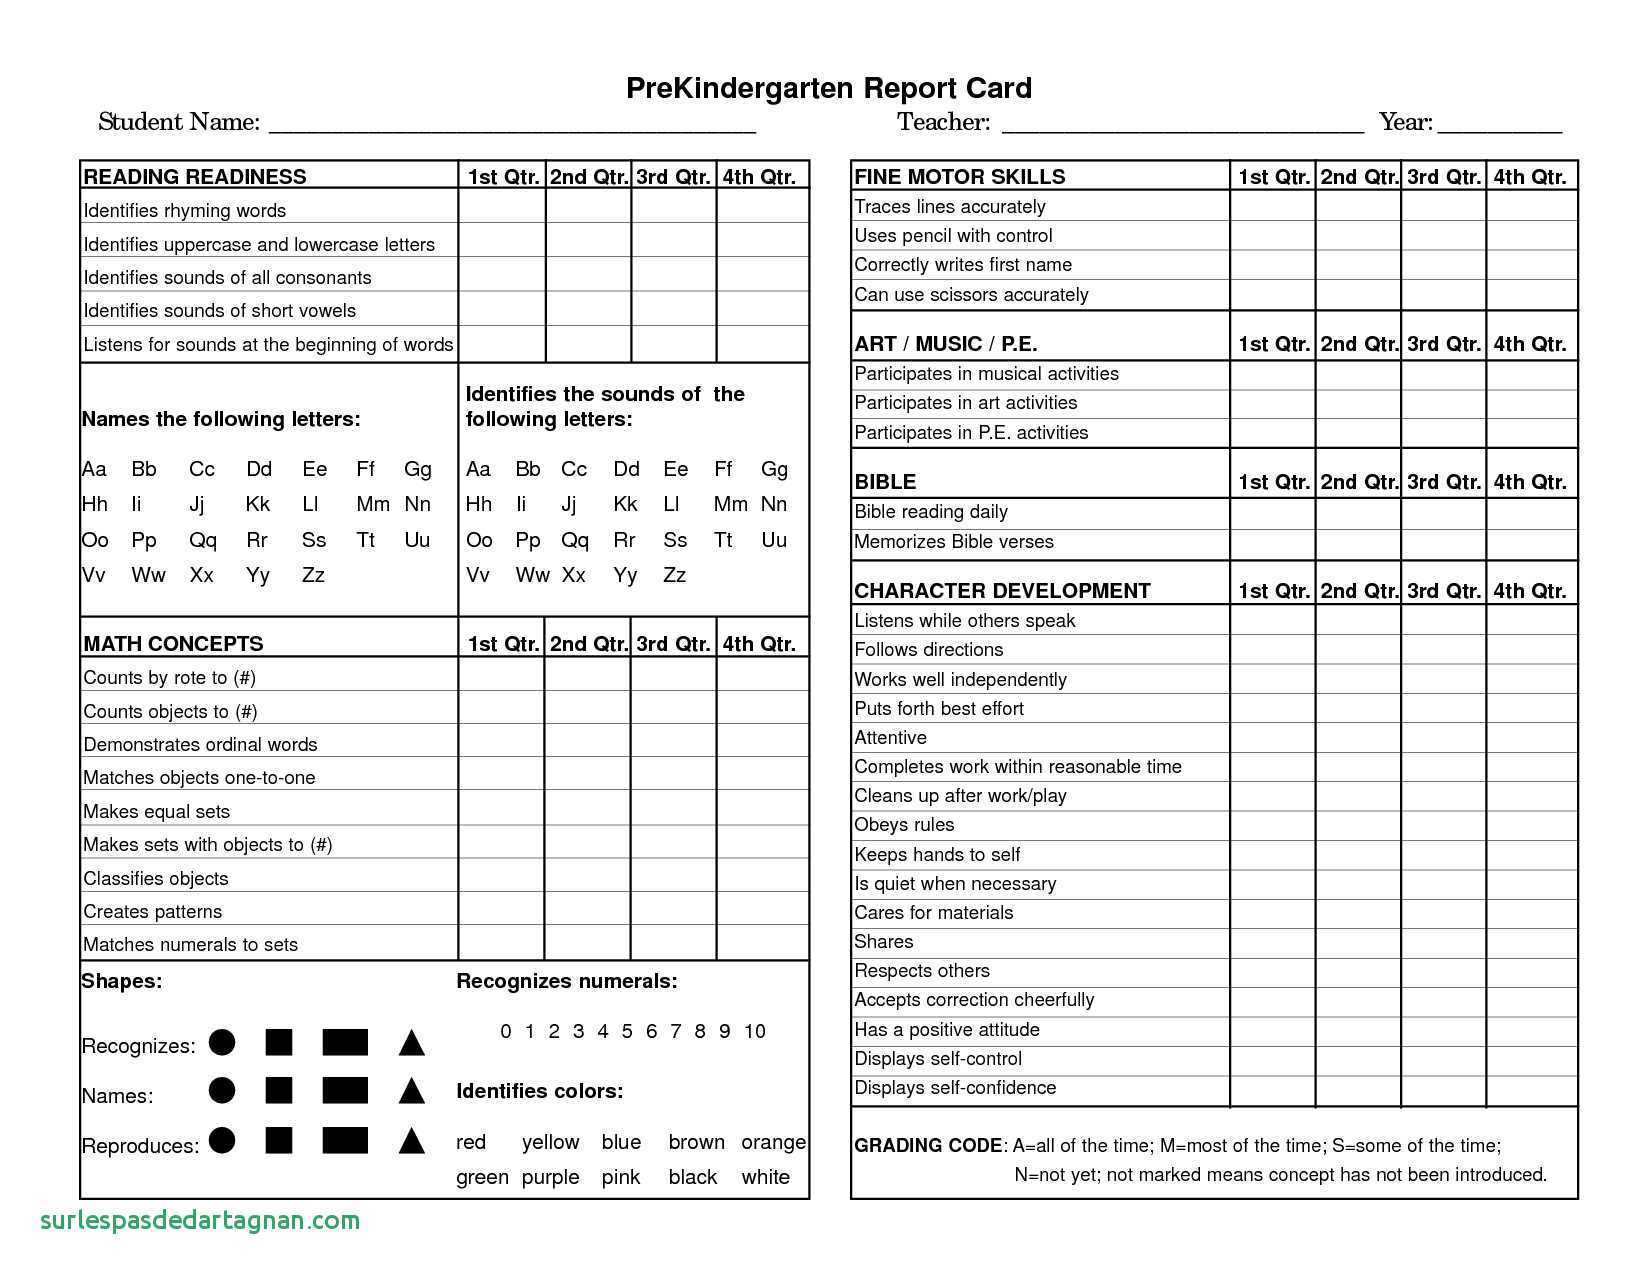 12 Progress Report Example For Students | Proposal Resume Throughout Preschool Weekly Report Template